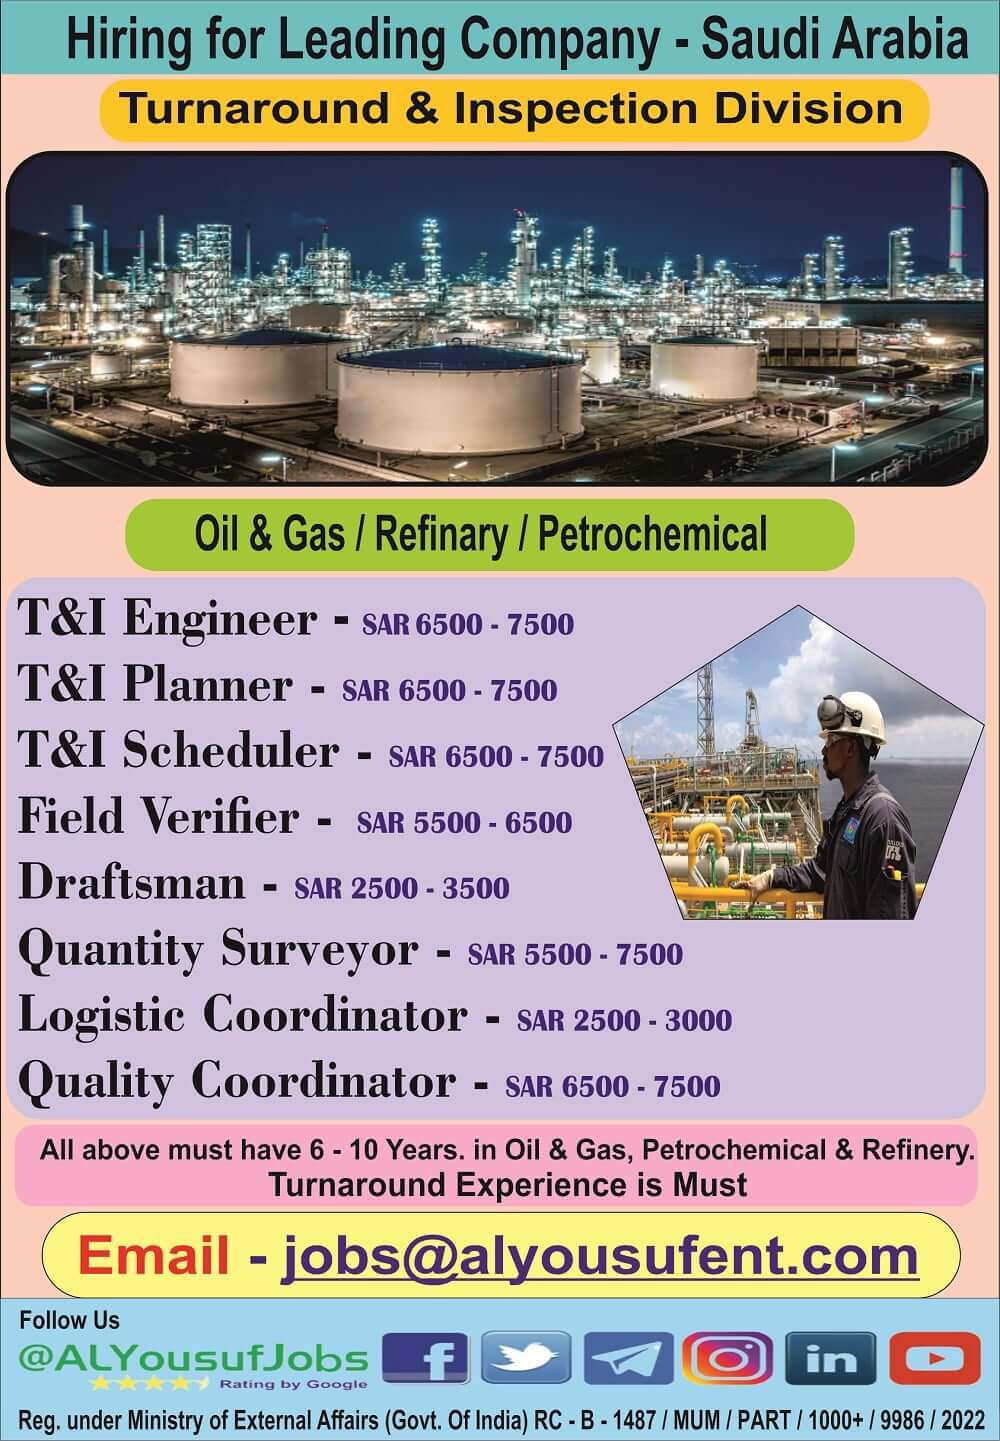 Abroad jobs Want for Oil & Gas Petrochemical Refinery - Saudi Arabia